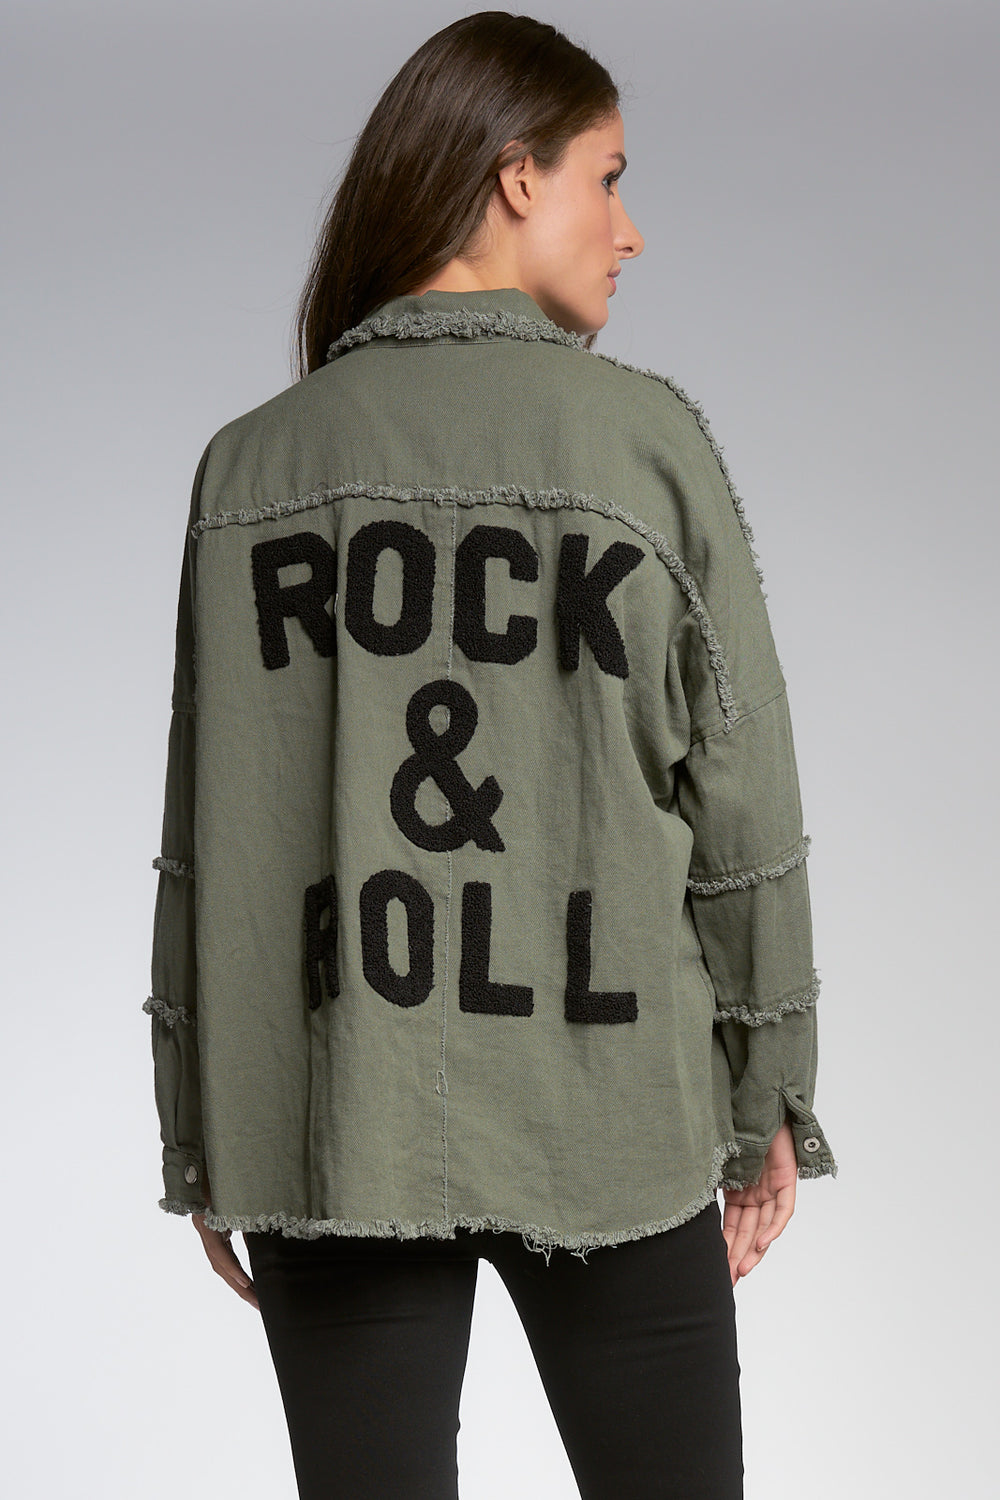 DISTRESSED JACKET - Kingfisher Road - Online Boutique